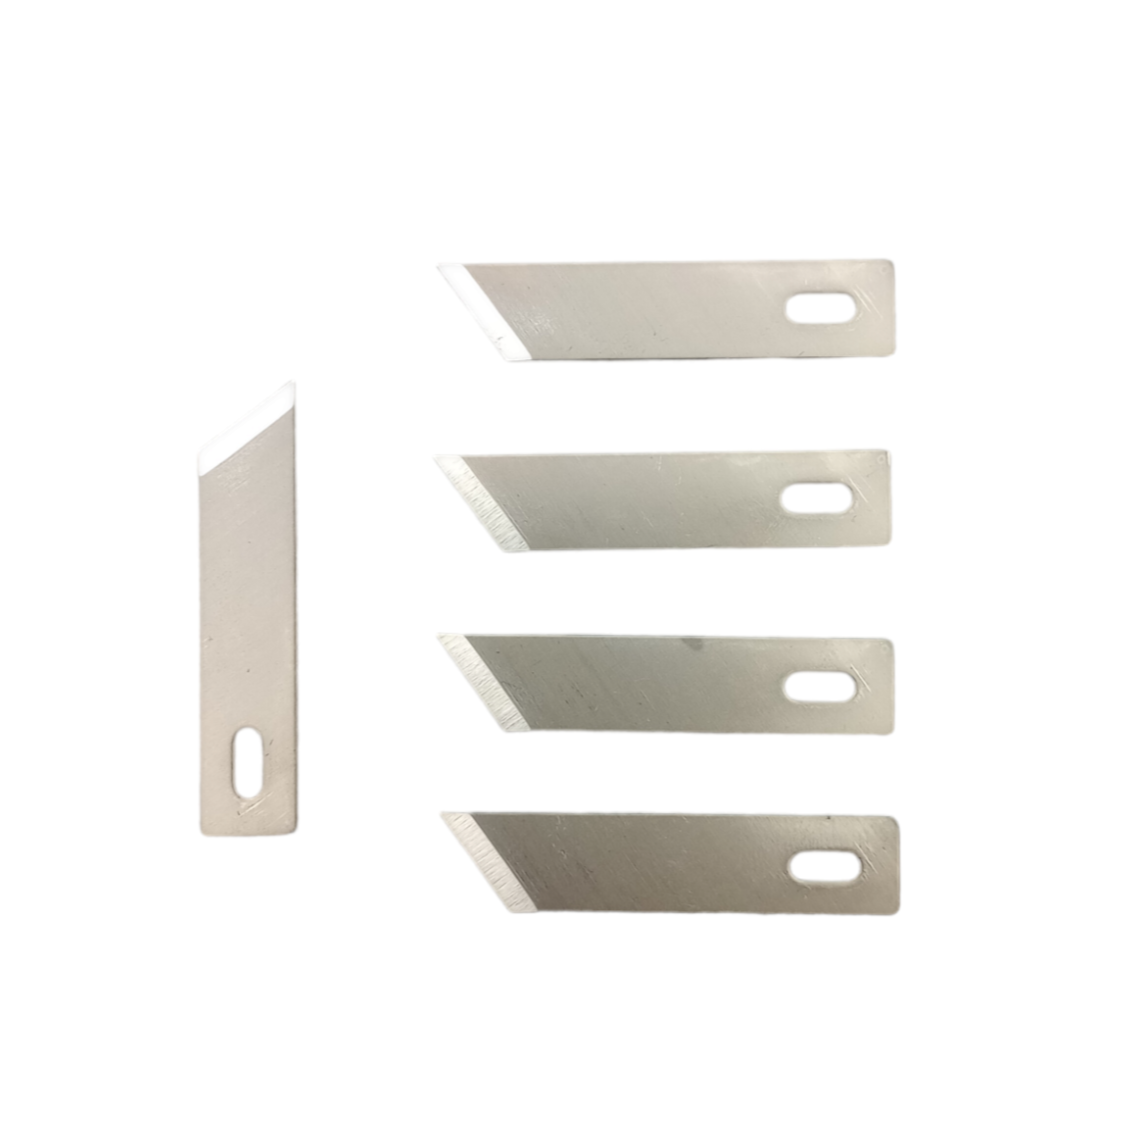 73553 Type: T19 Blades (pack of 5)